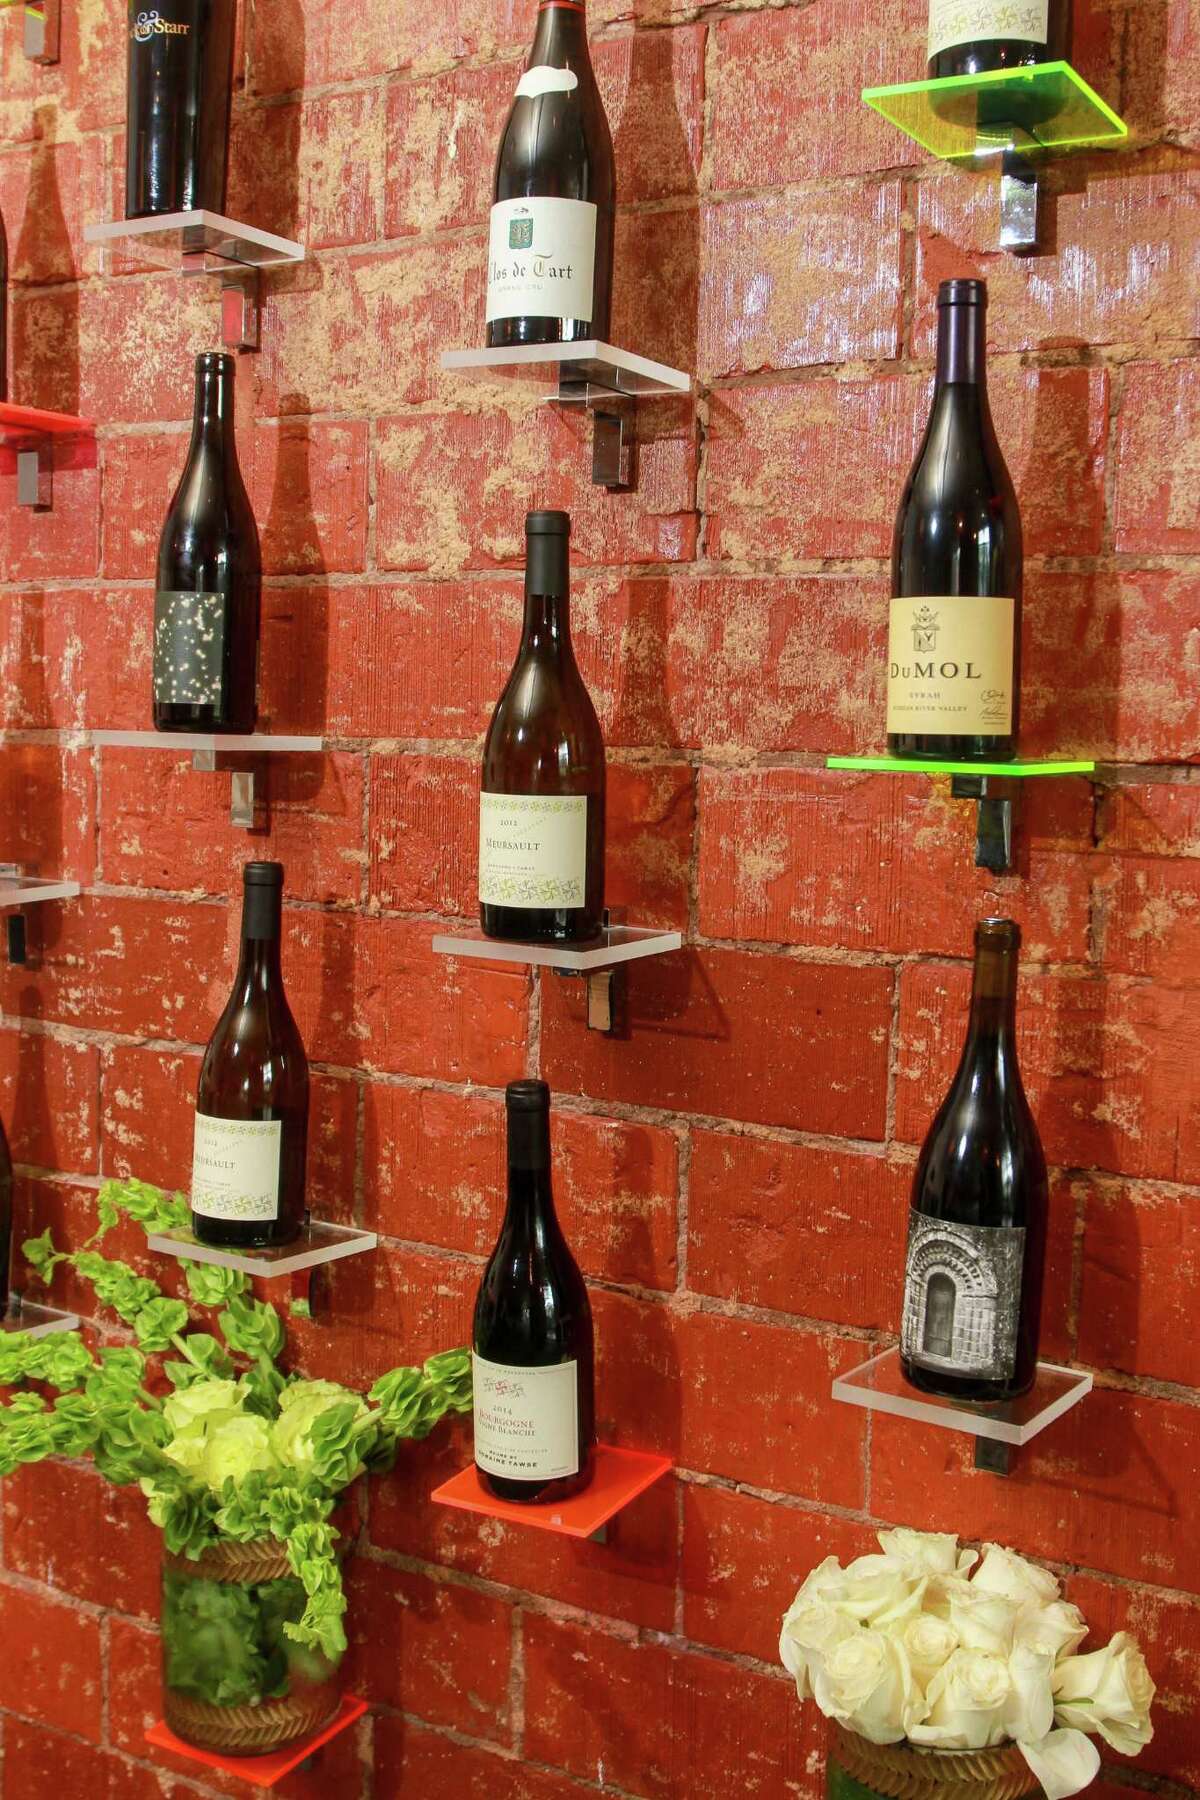 The wine wall at the Avondale Food and Wine